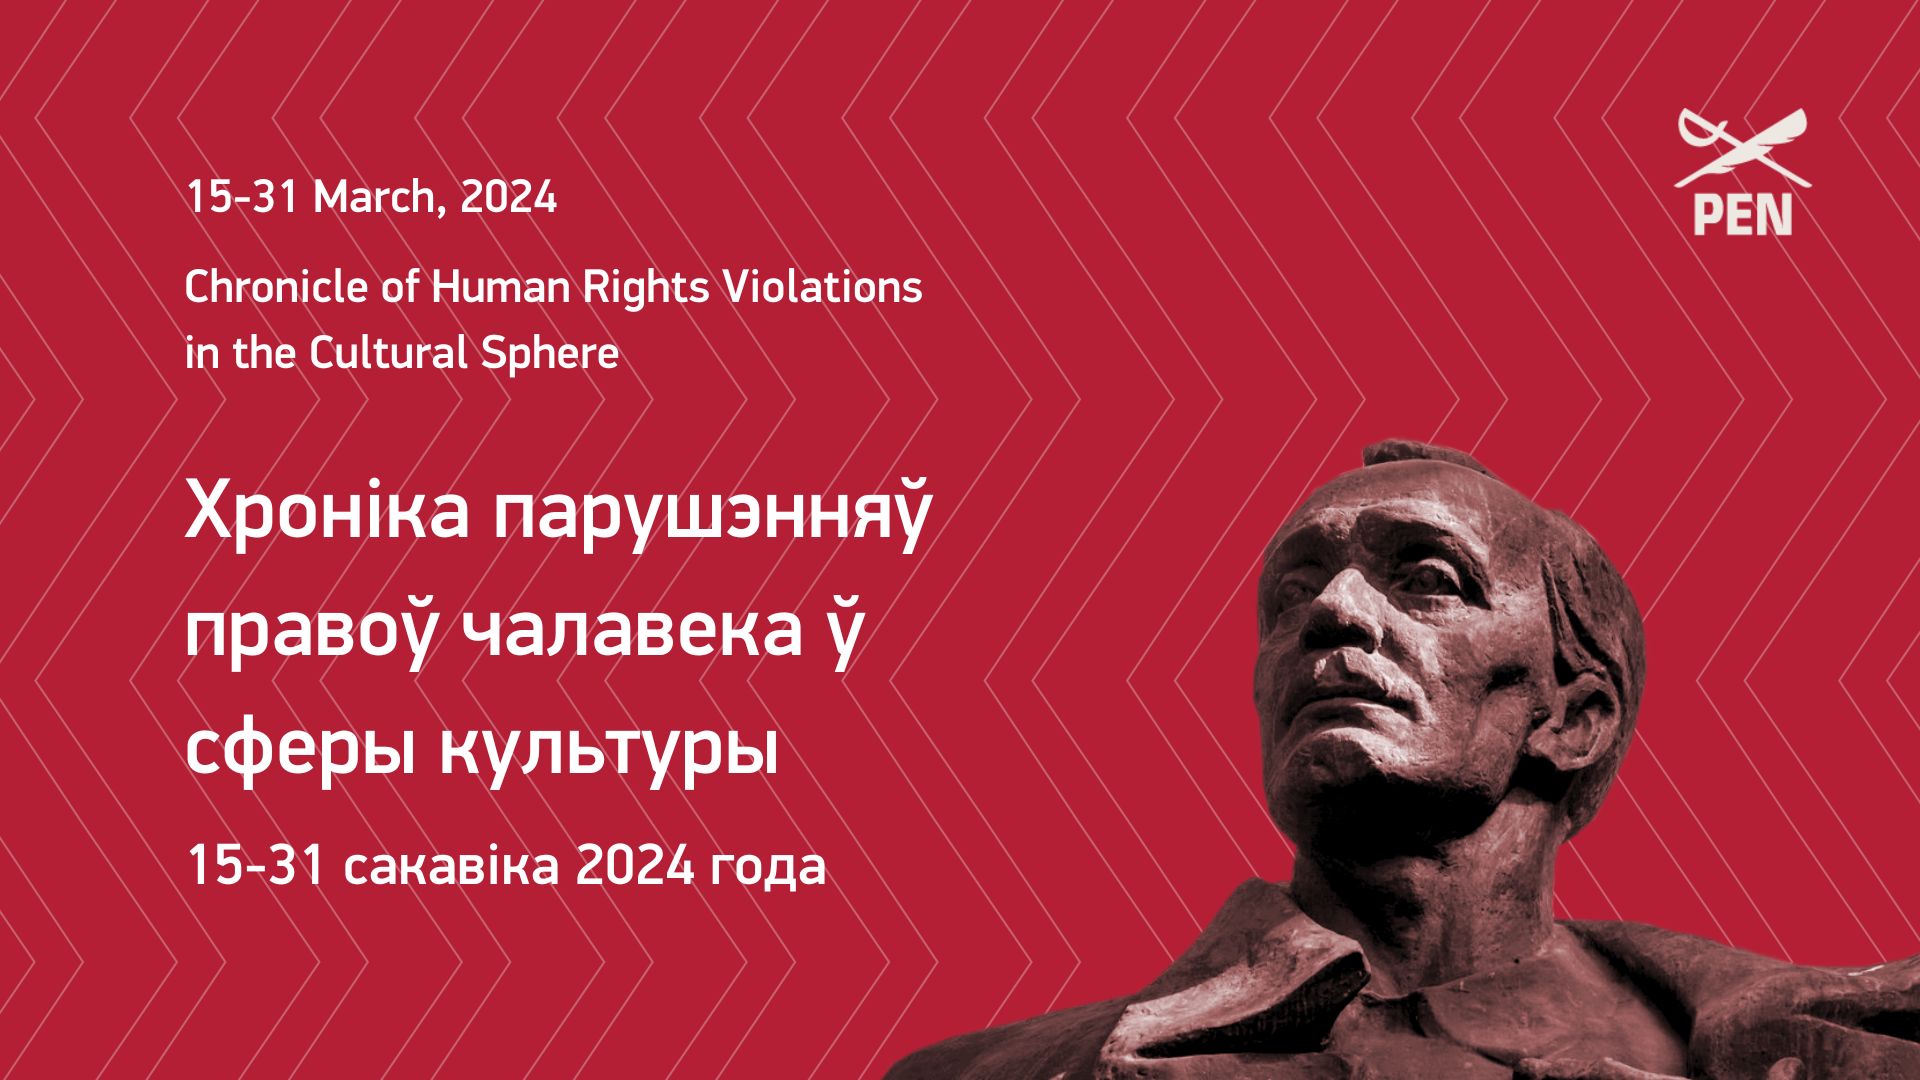 Chronicle of human rights violations in the sphere of culture (15-31 March 2024)